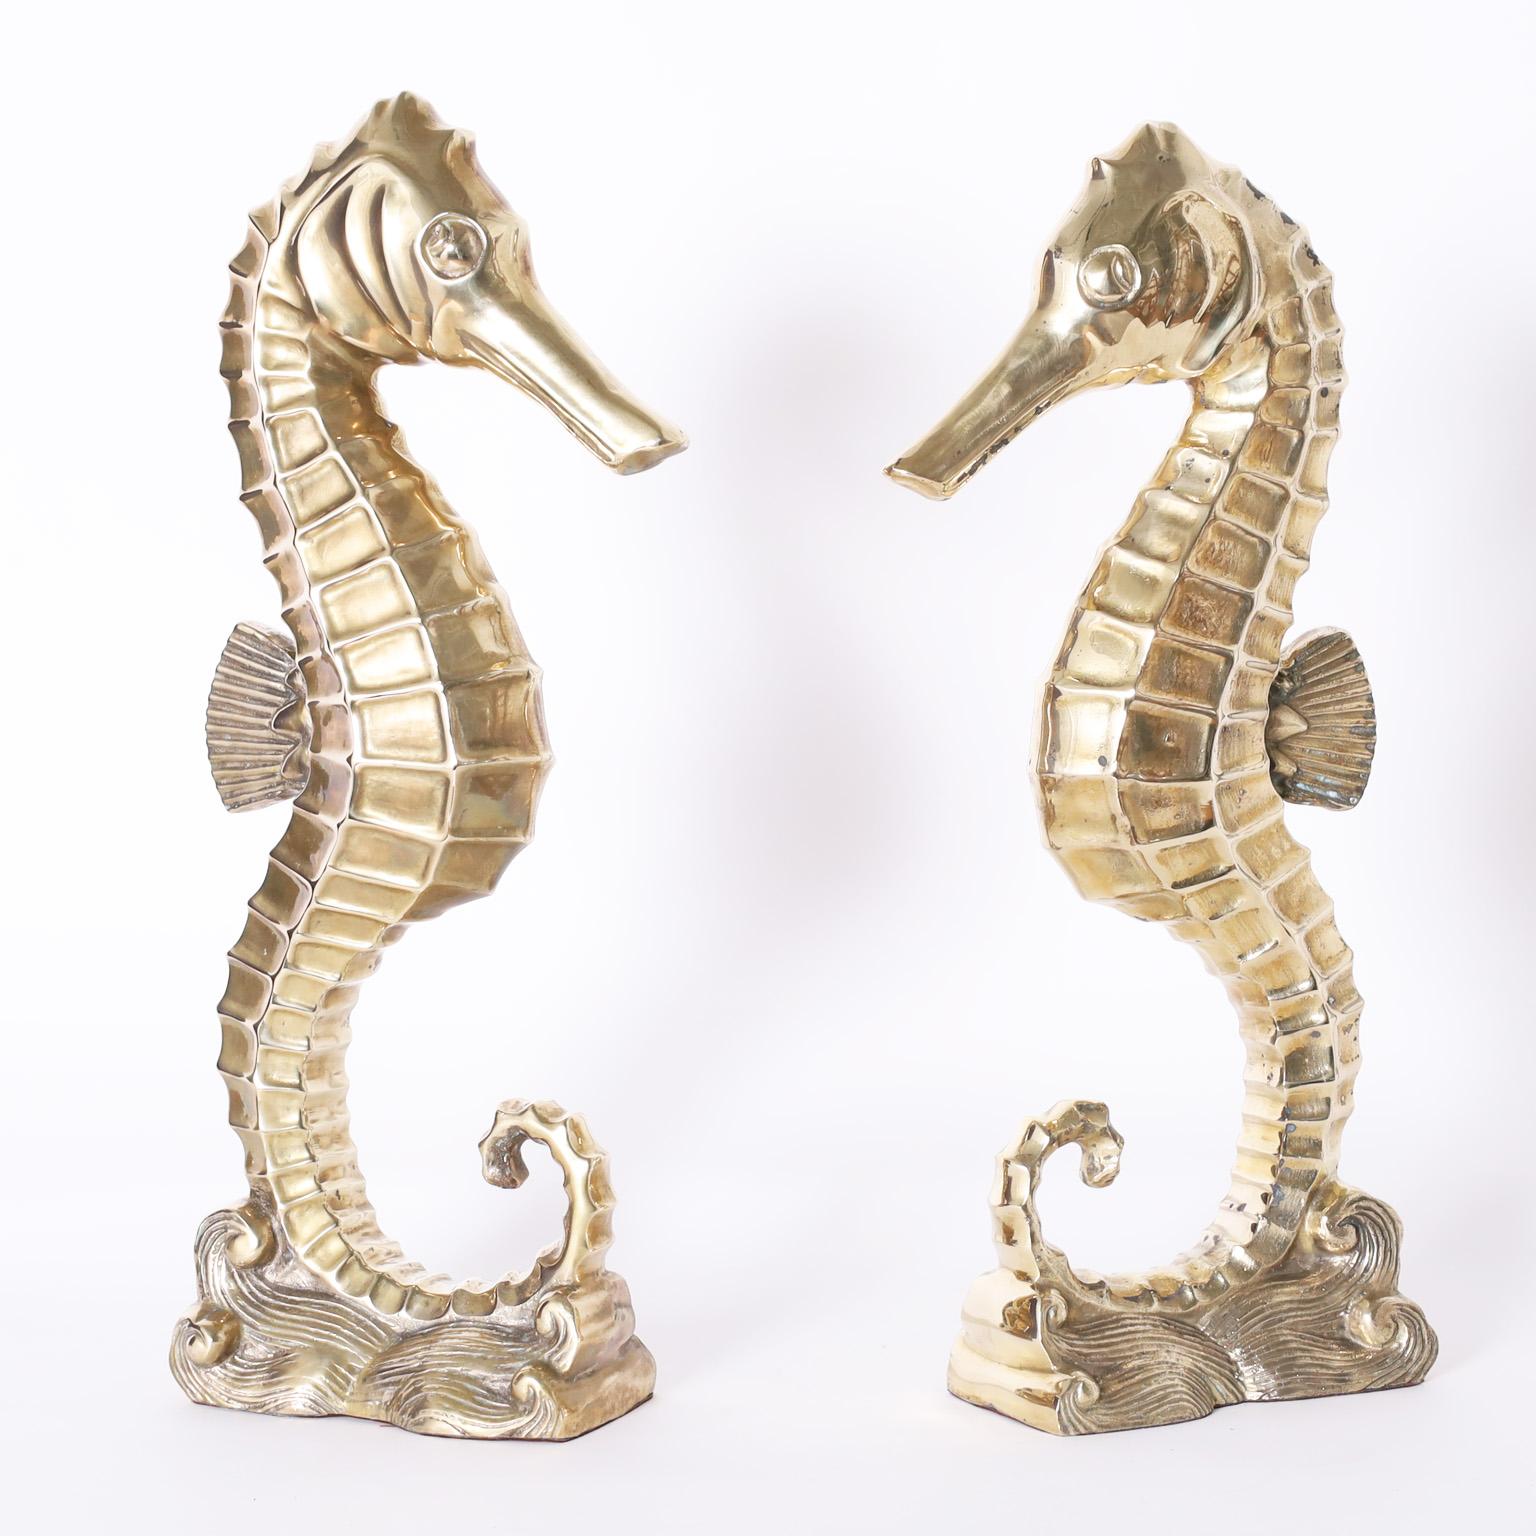 Striking vintage cast brass seahorse sculpture or object of art with a dramatic stylized form.

Please see our other listing for the pair.